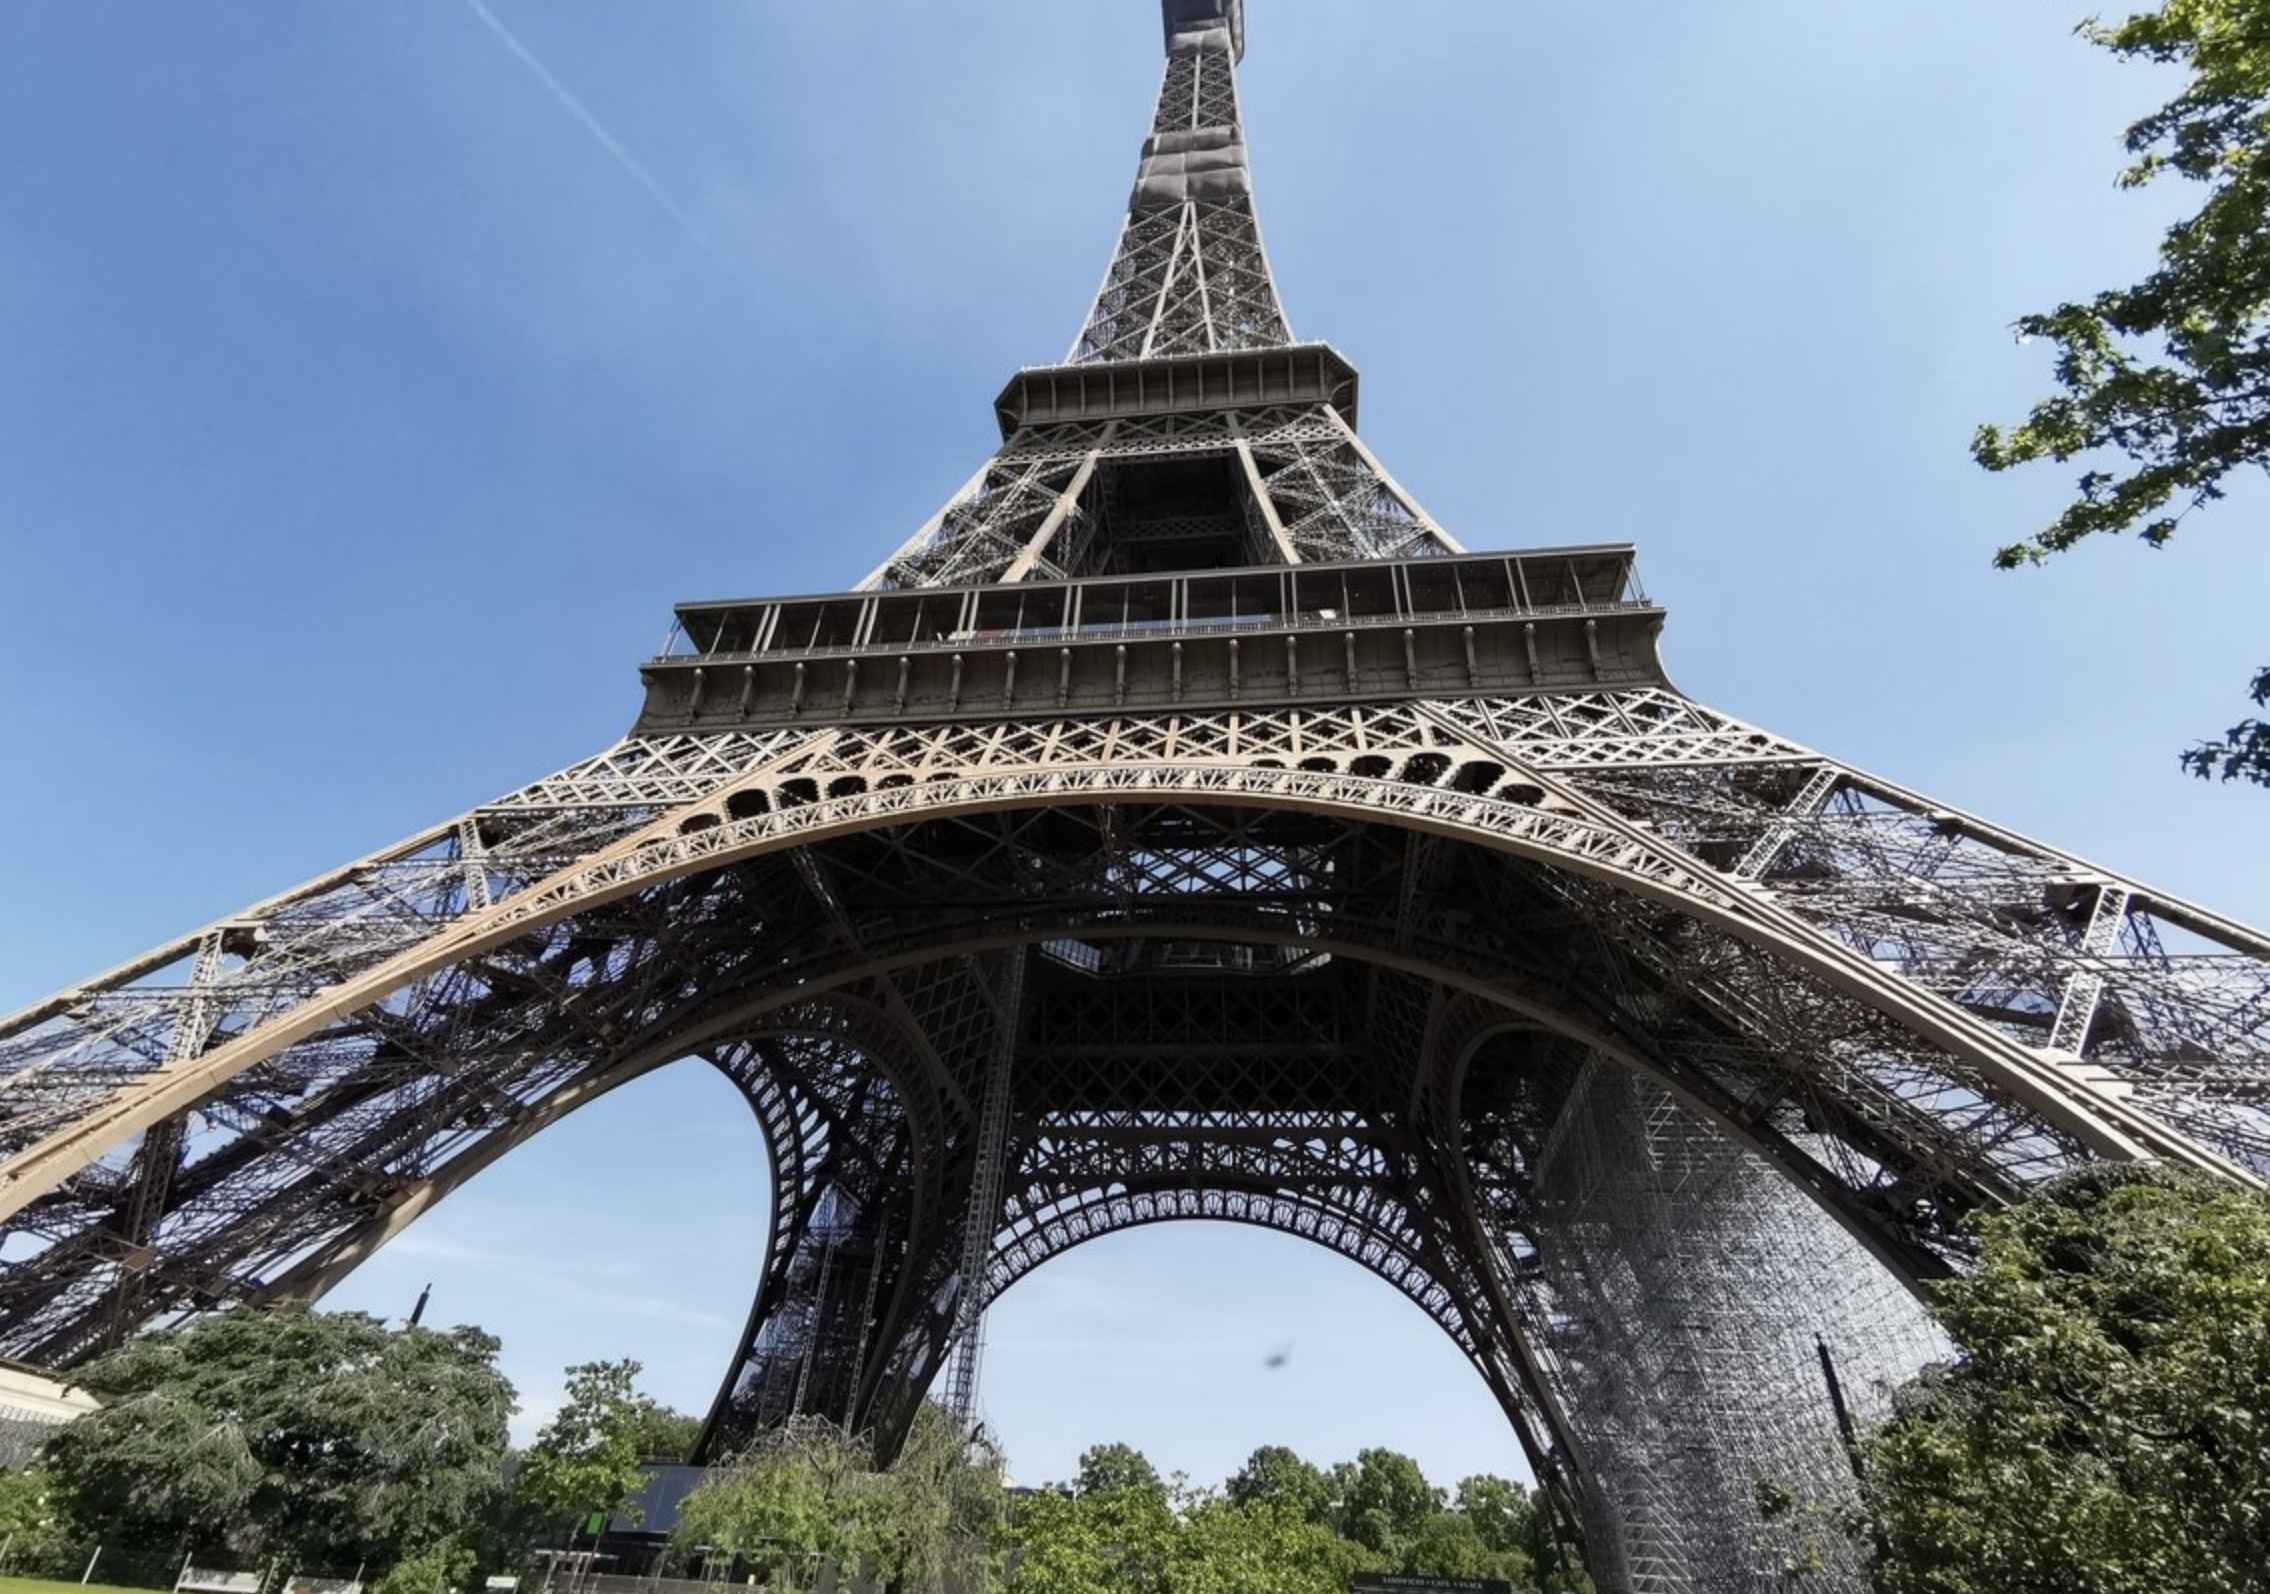 What's Inside the Eiffel Tower